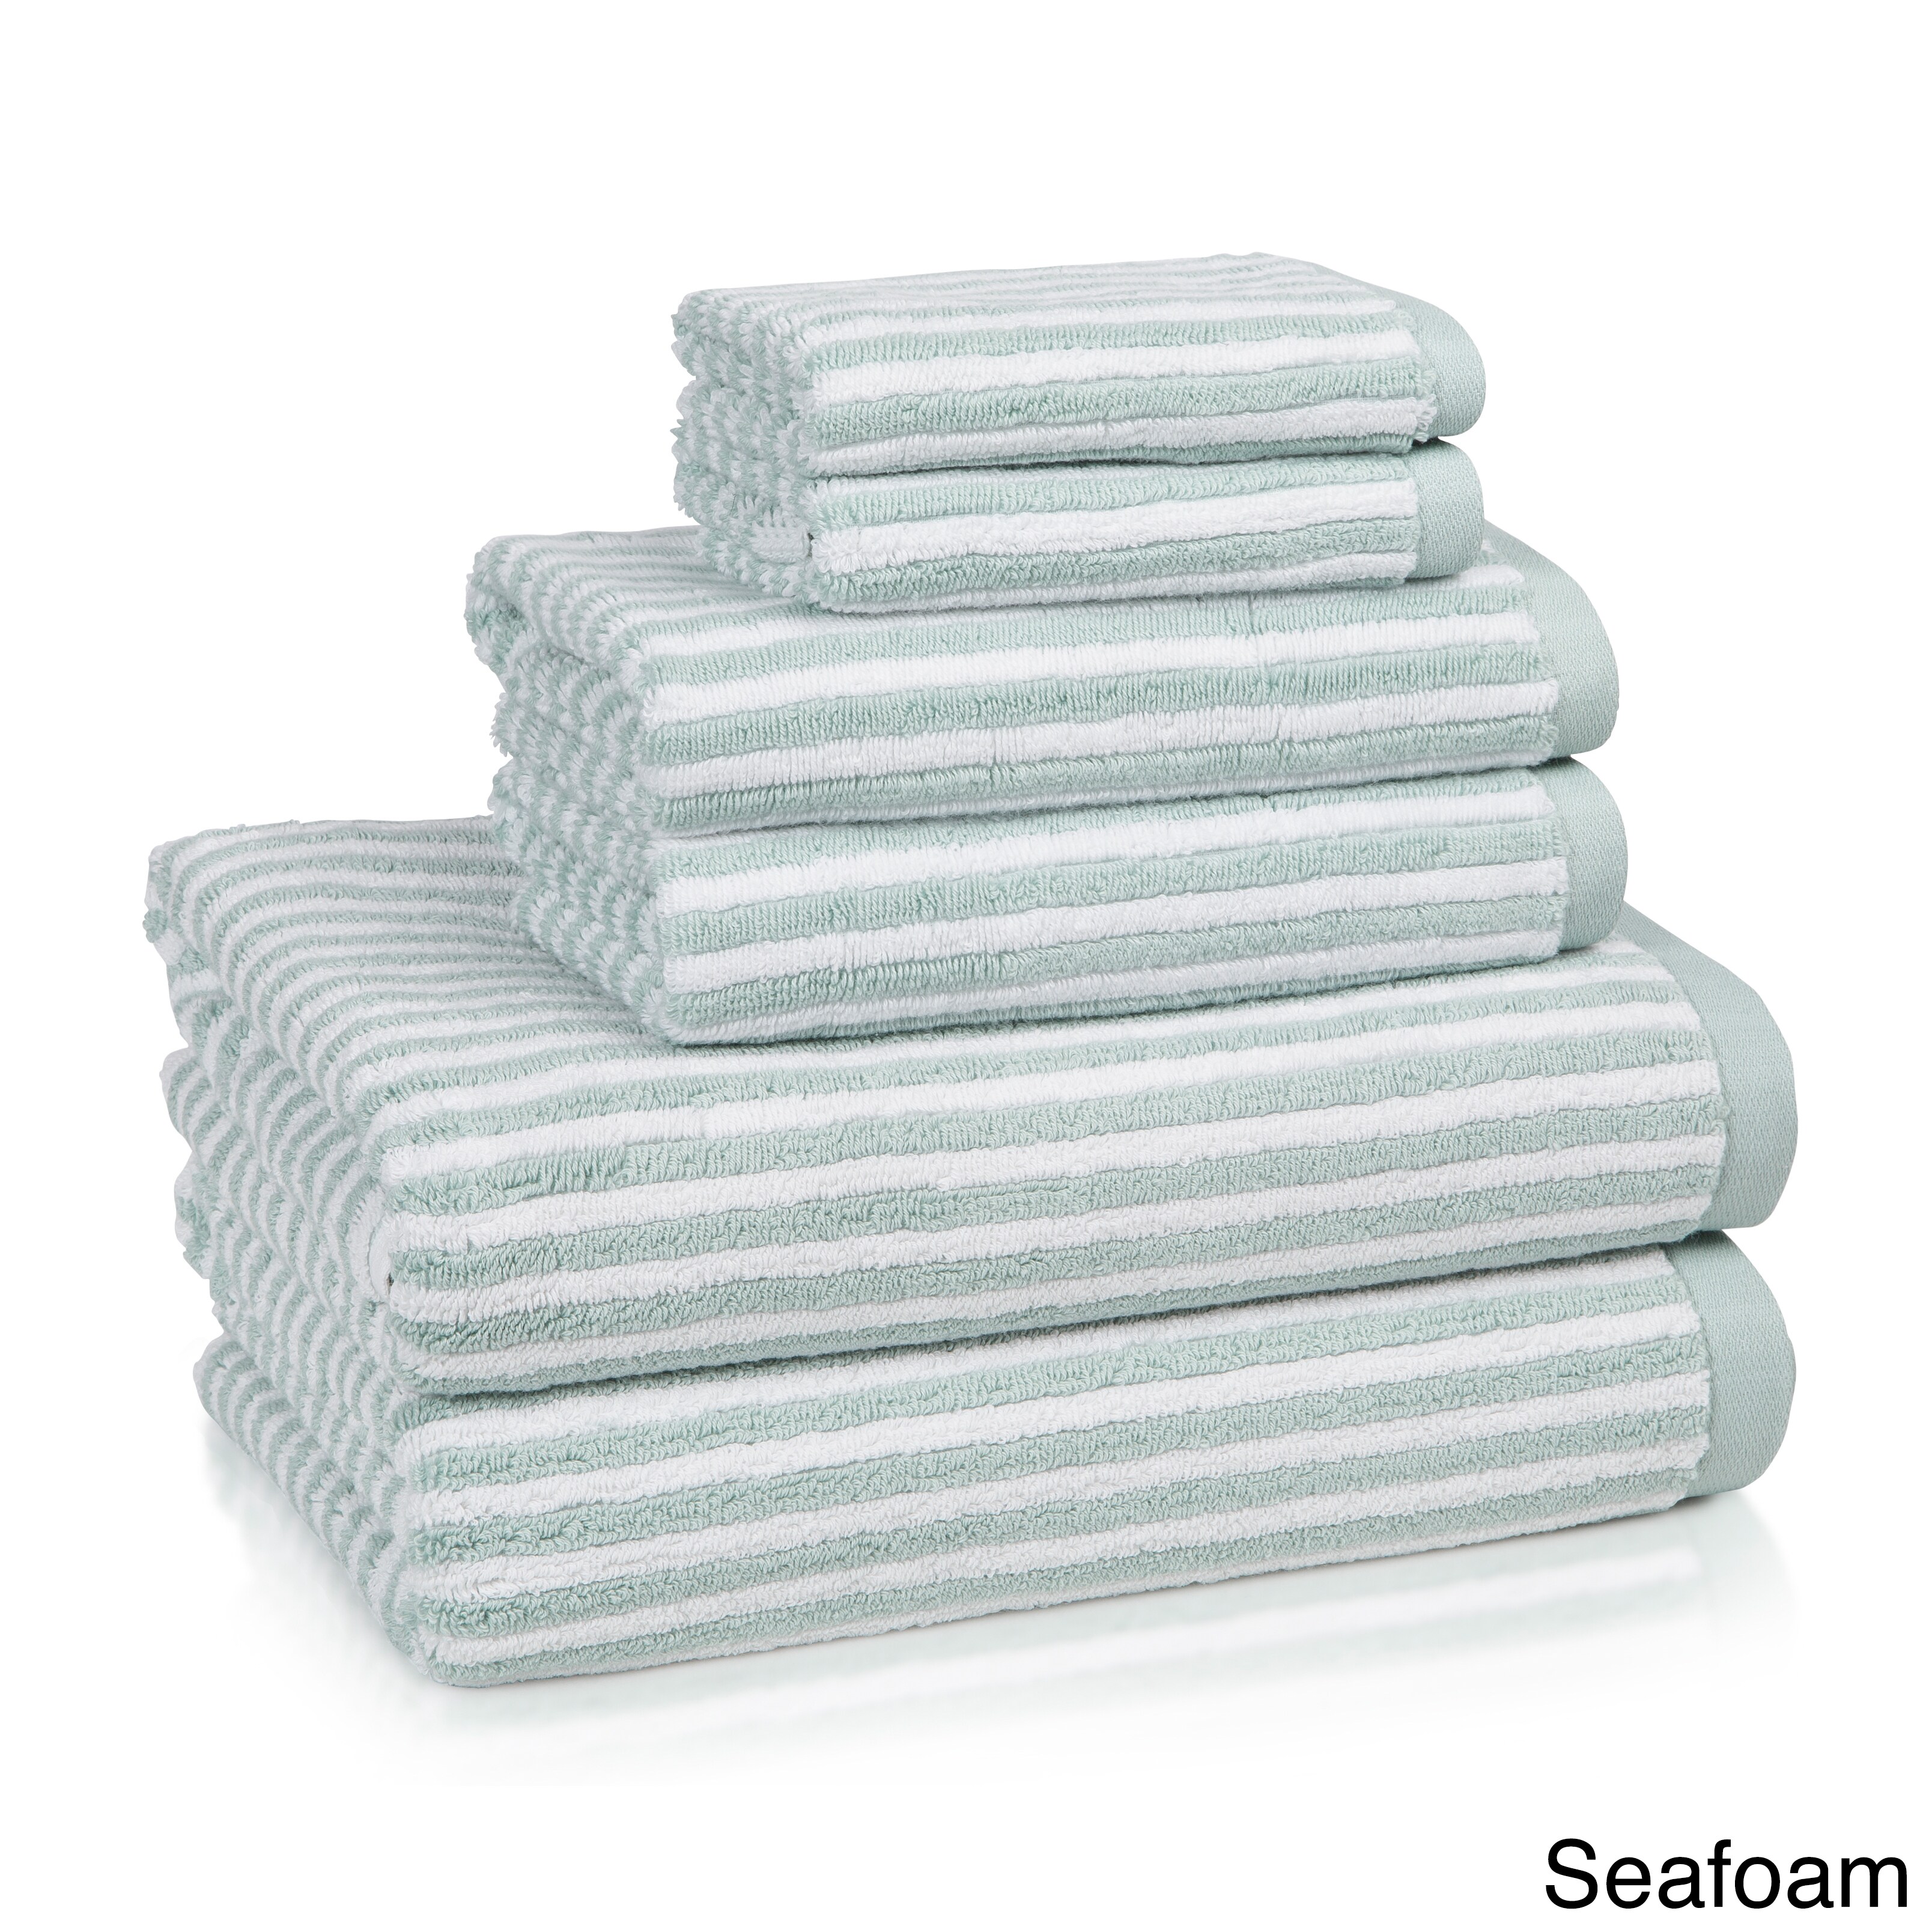 https://ak1.ostkcdn.com/images/products/7842835/Luxury-Turkish-650-GSM-Cotton-Striped-Collection-6-piece-Towel-Set-d0785f49-7628-4e12-a503-4a161ad163e8.jpg